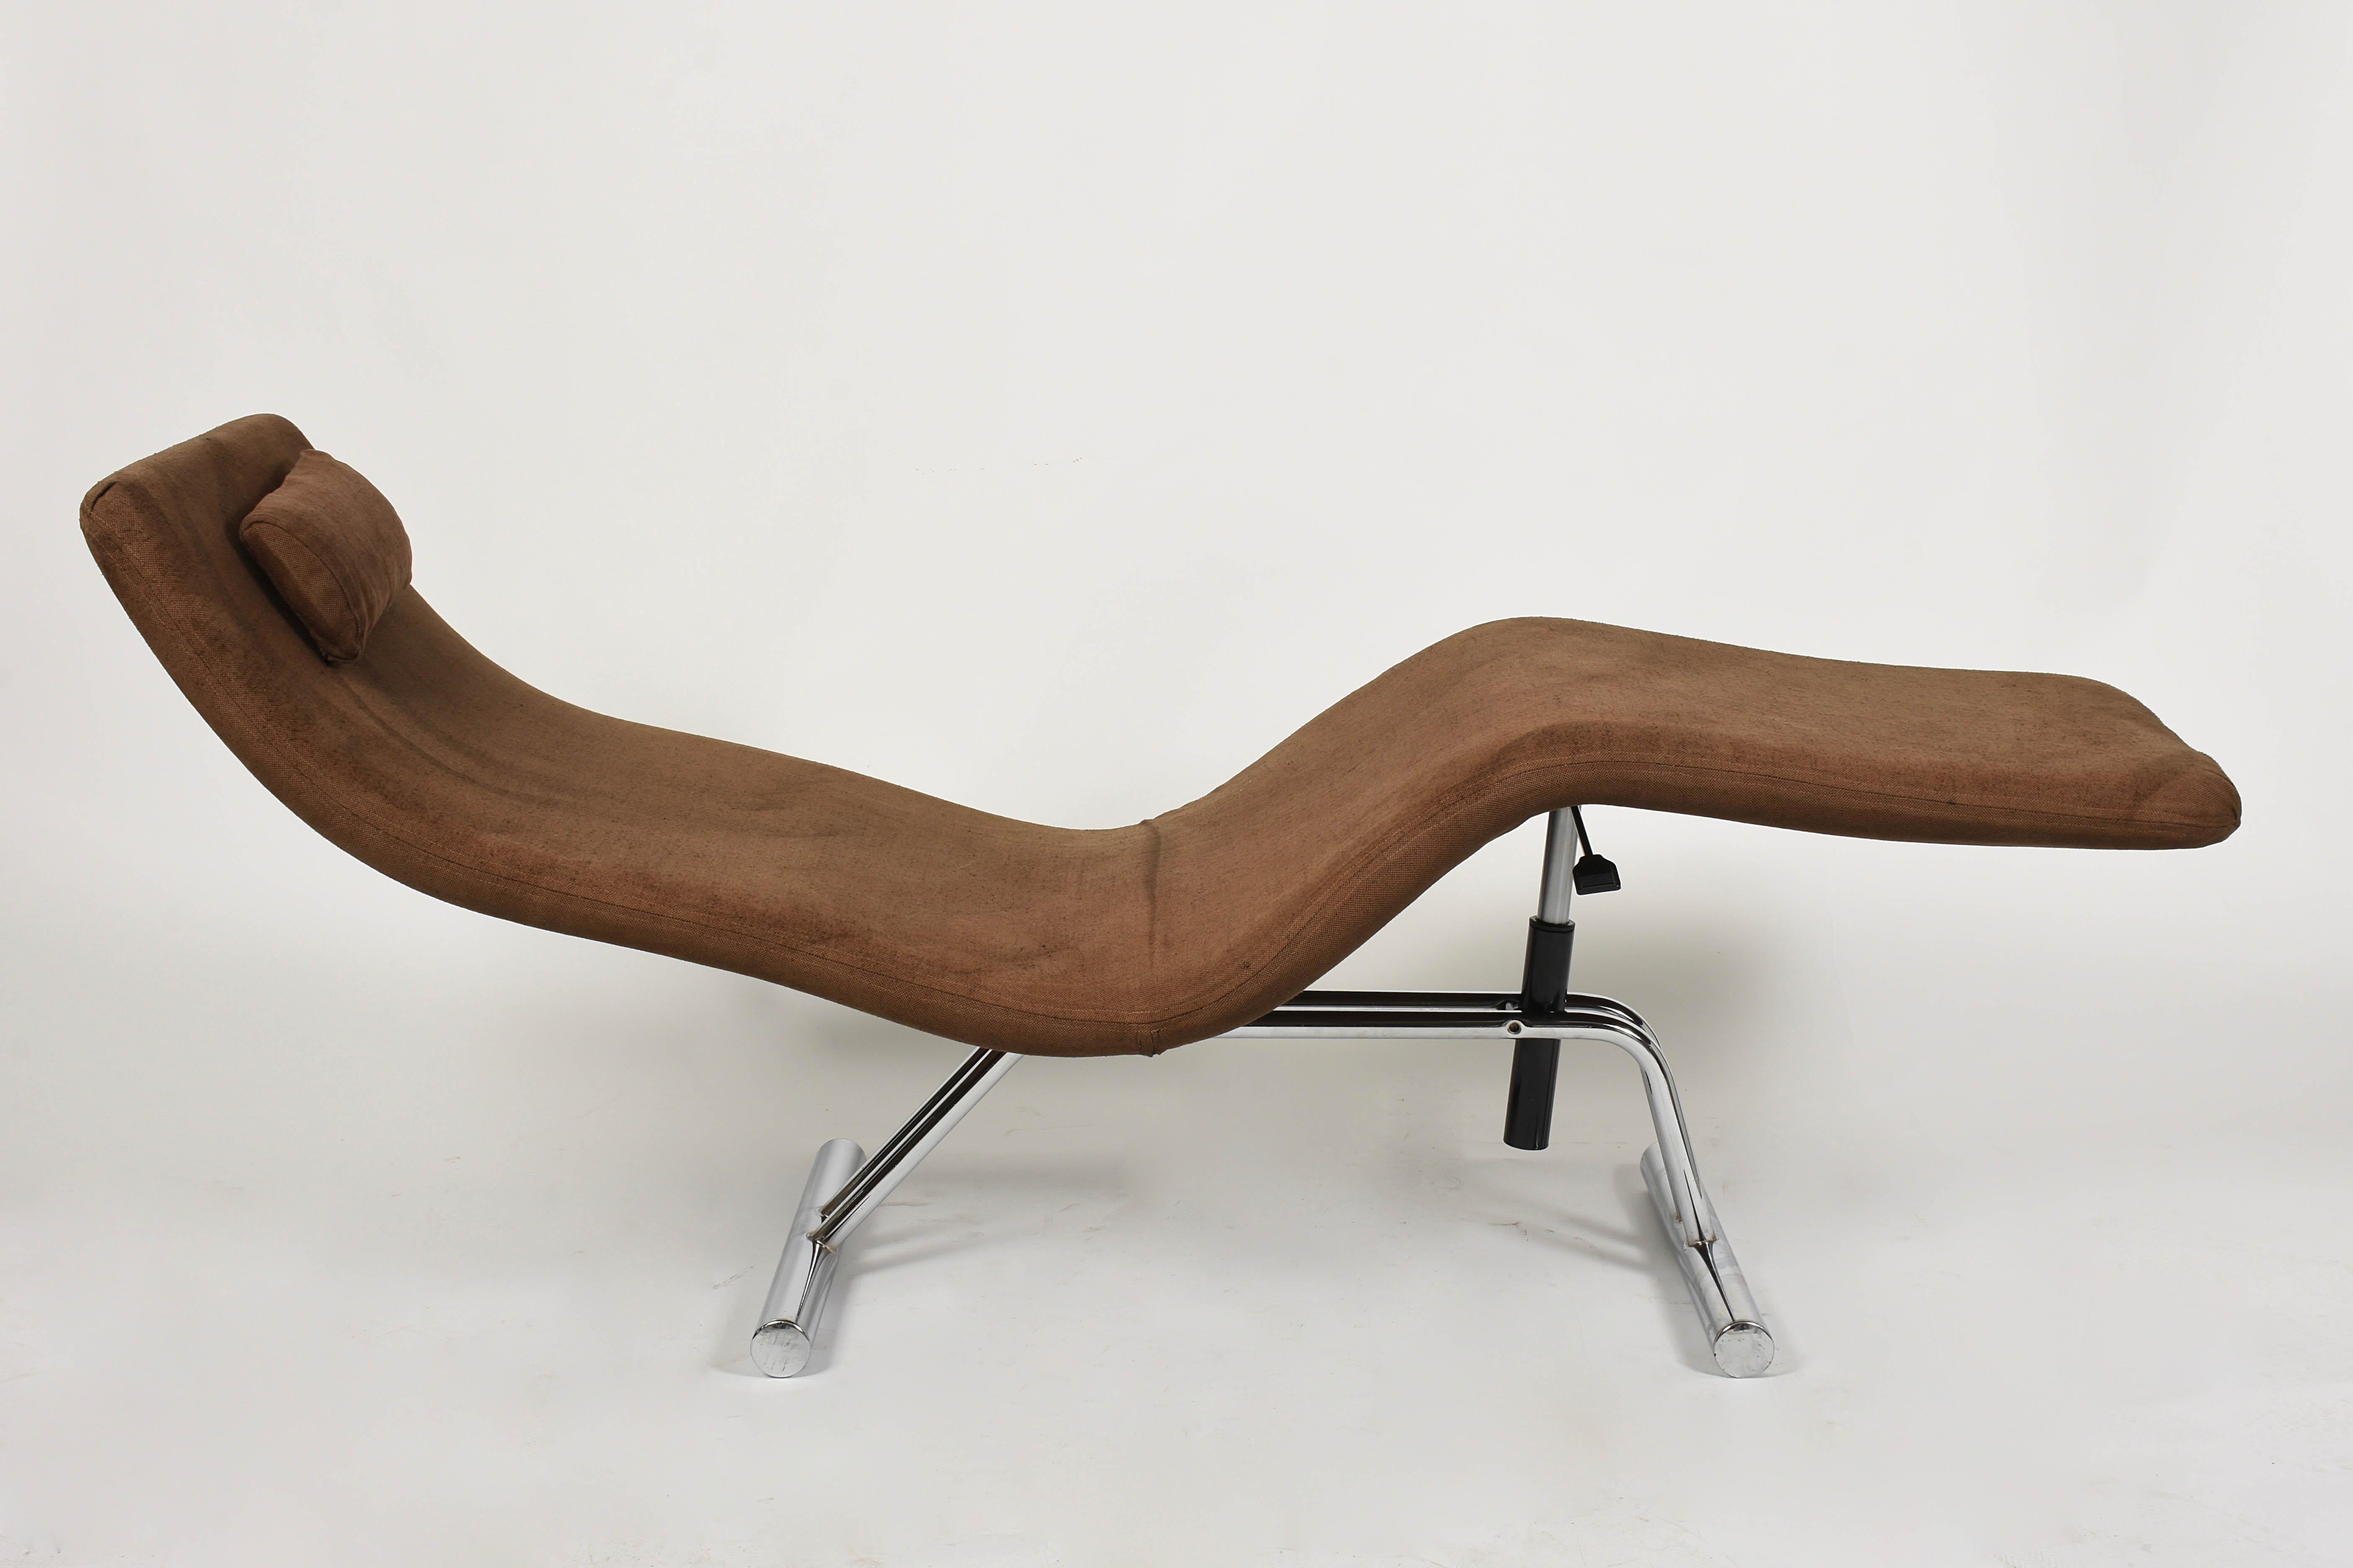 Midcentury Brown Fabric and Chrome Steel Chaise Longue, Paul Tuttle Style, 1980s For Sale 6